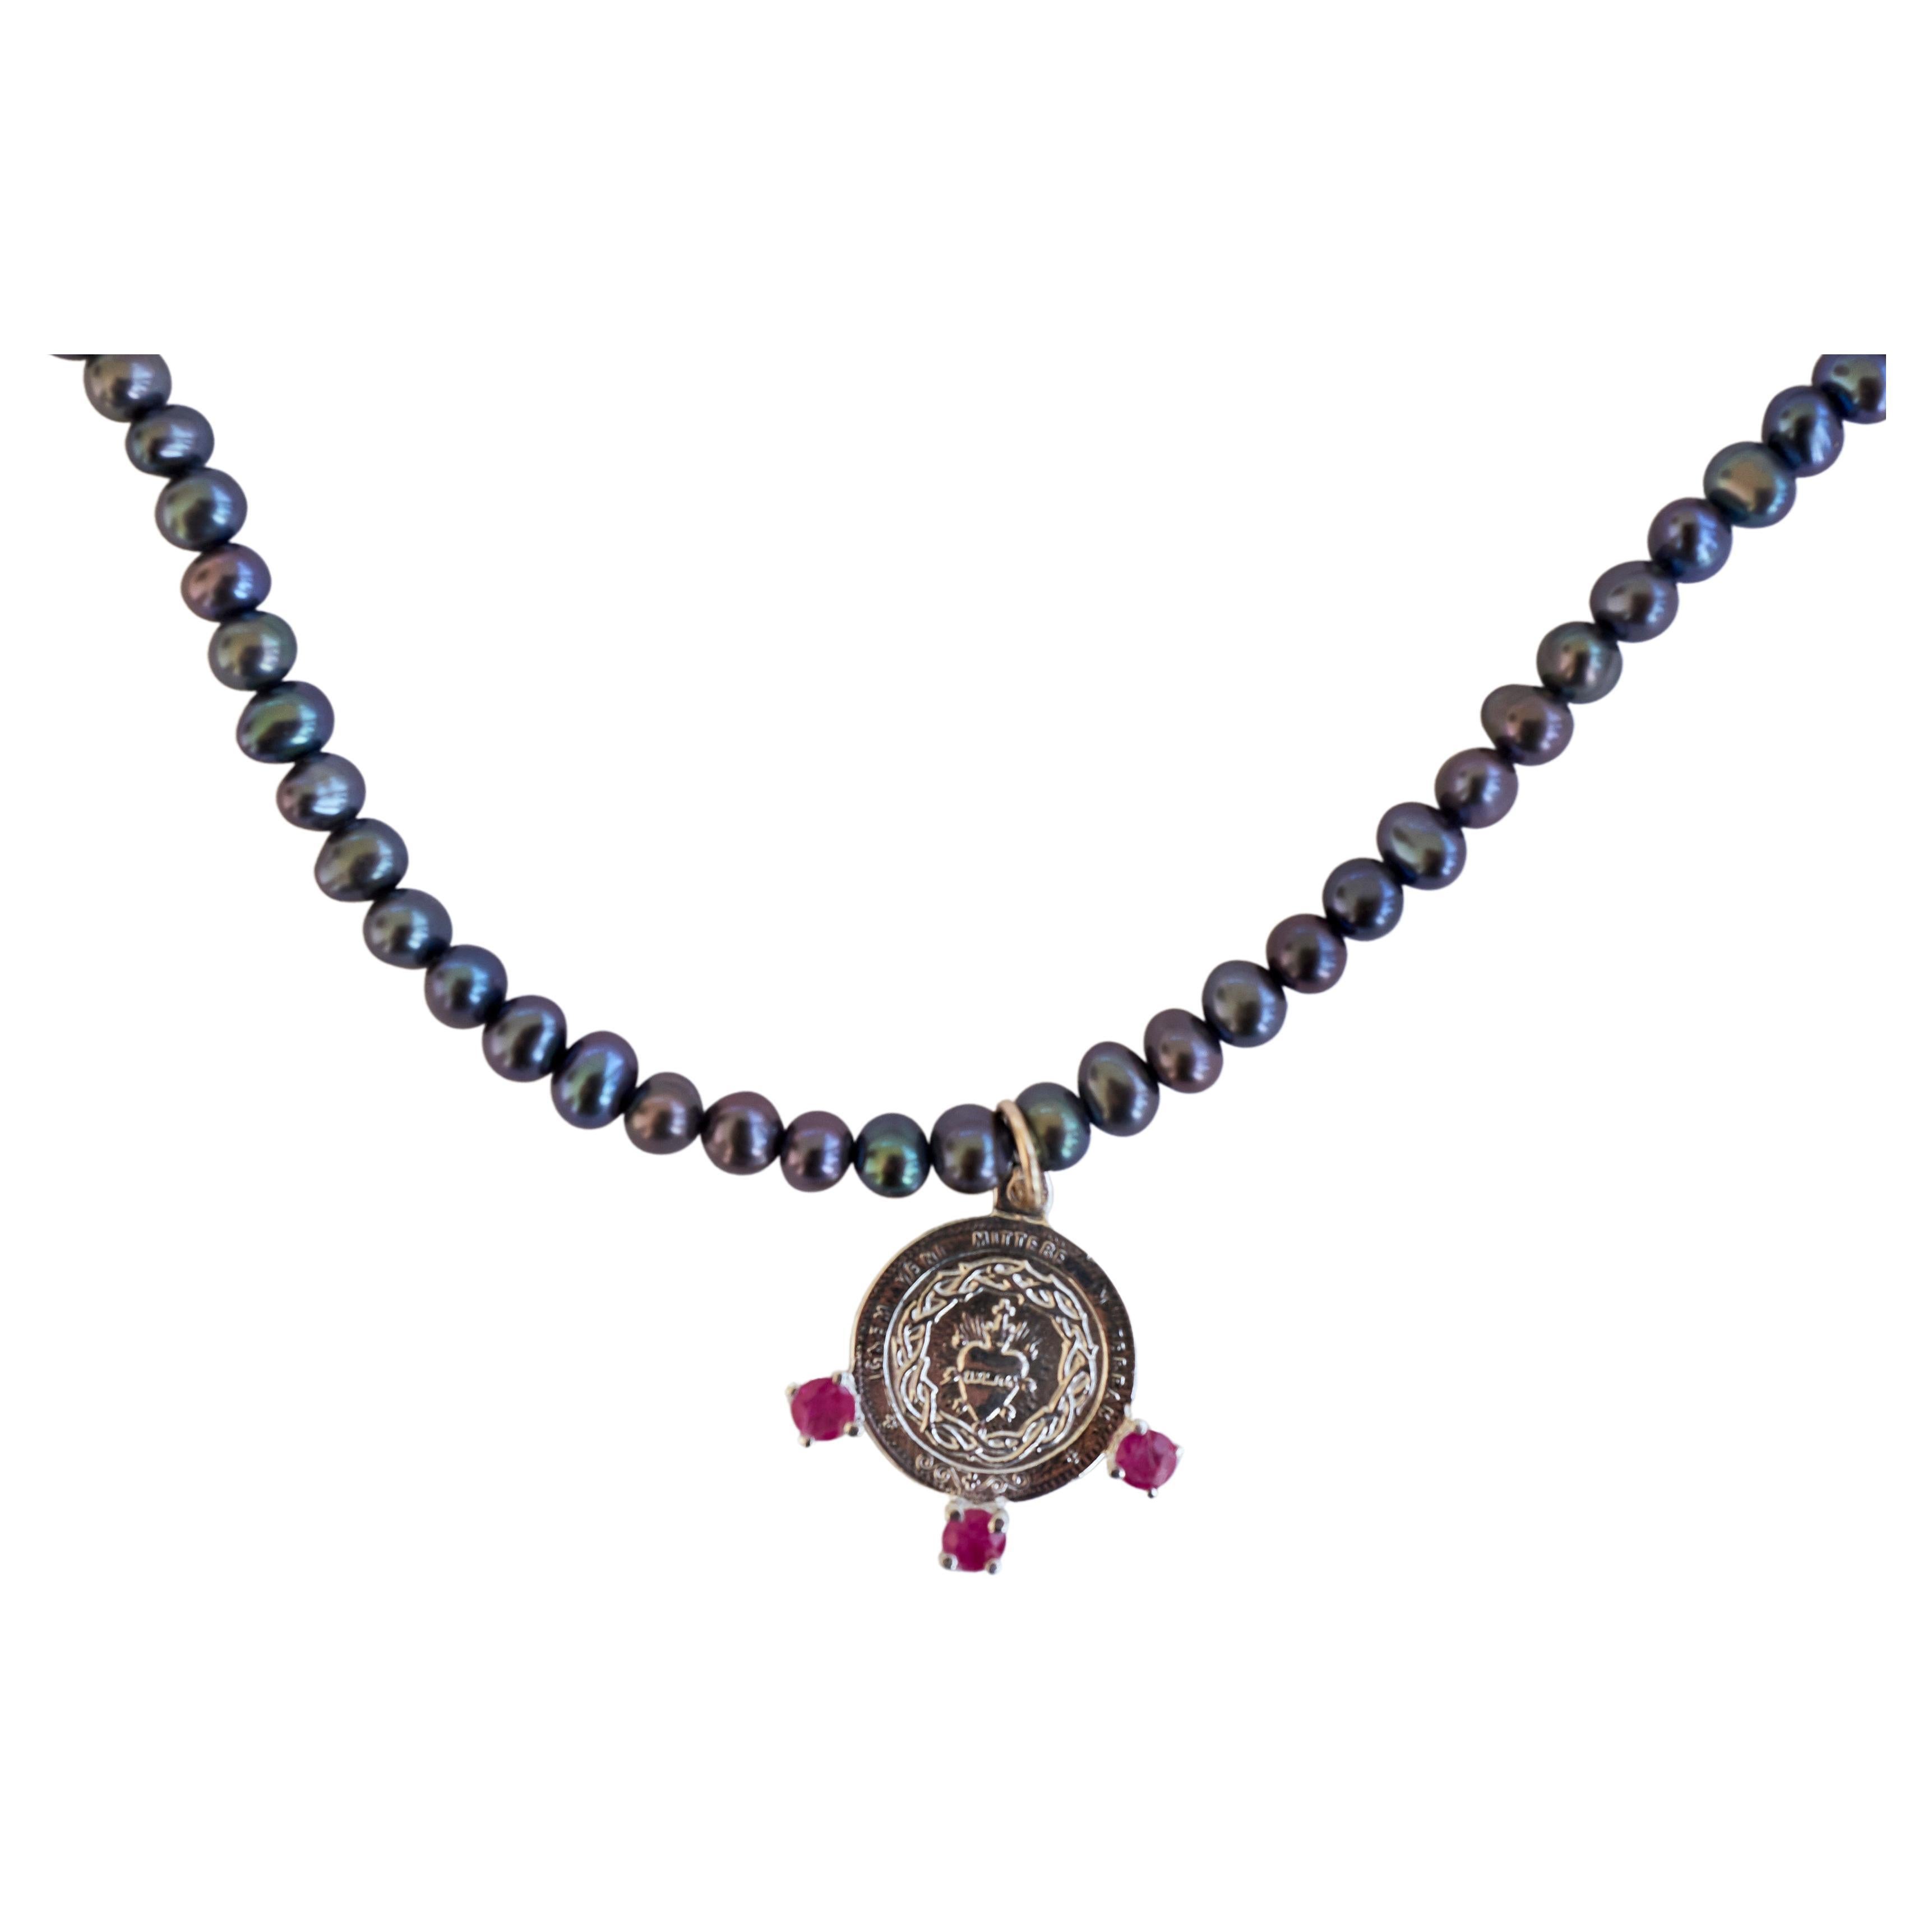 Black Pearl Chain Necklace Medal Sacred Heart Pink Tourmaline J Dauphin